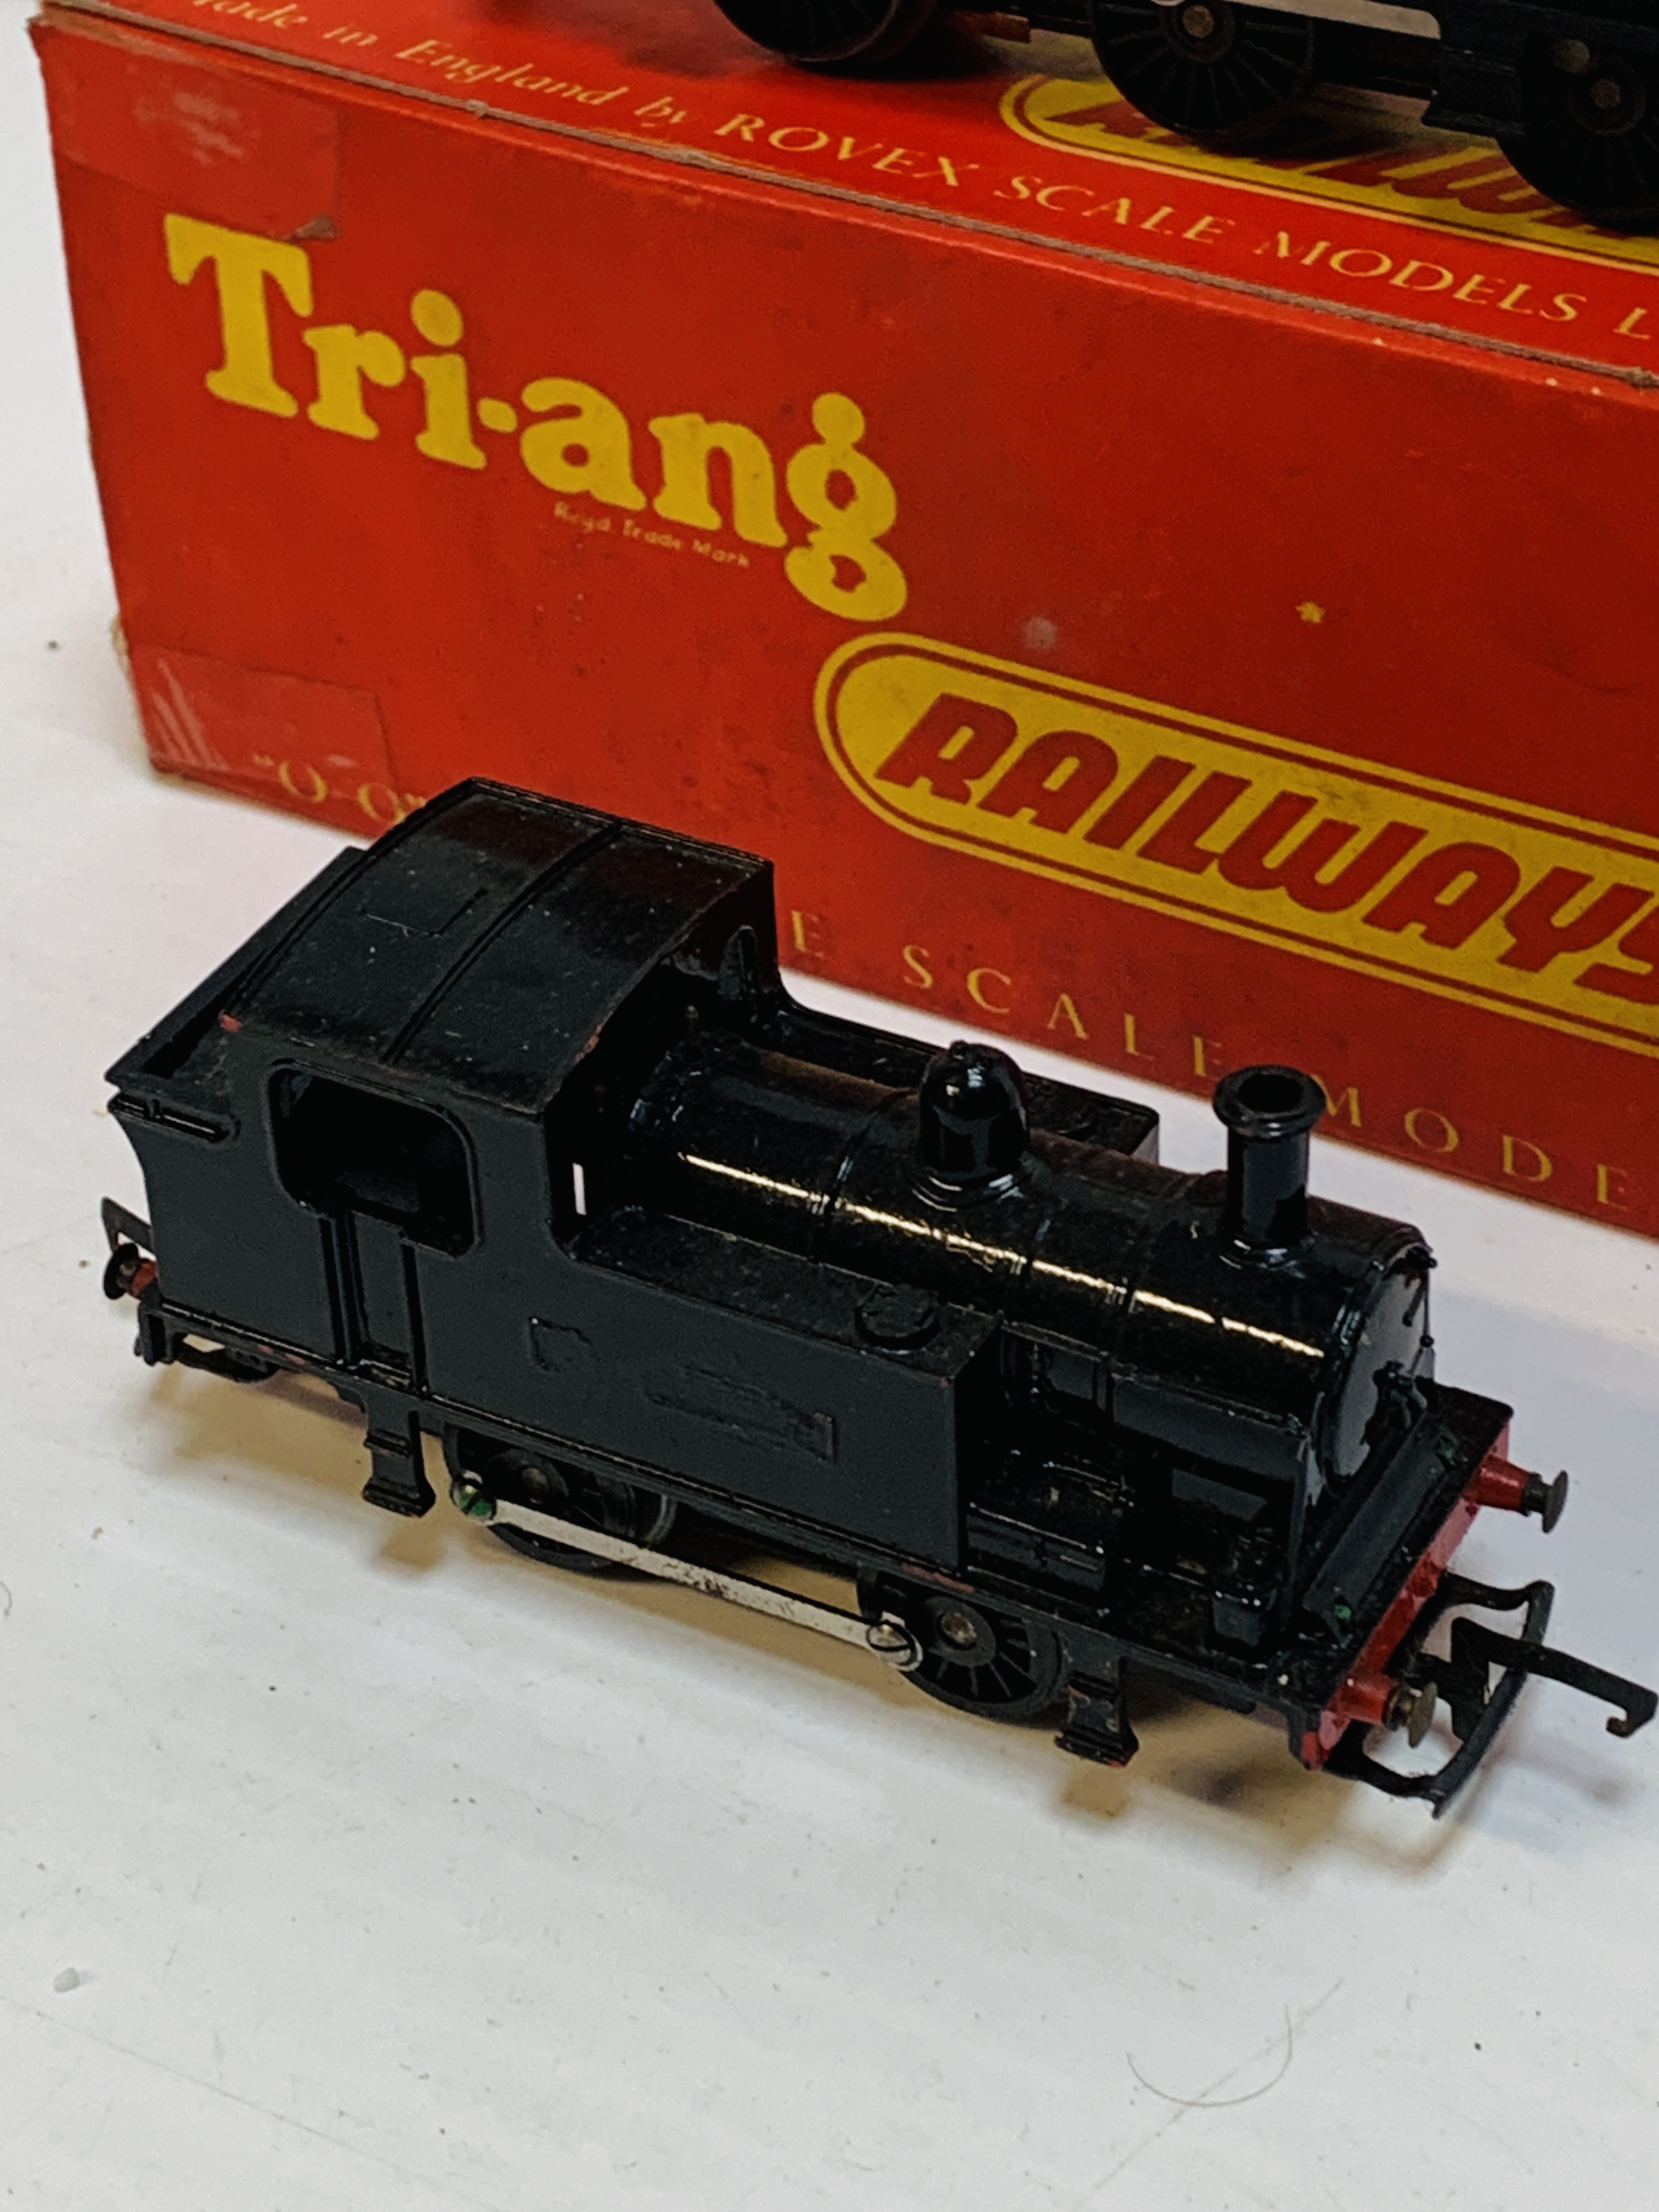 Two Tri-ang tank engines. - Image 3 of 3